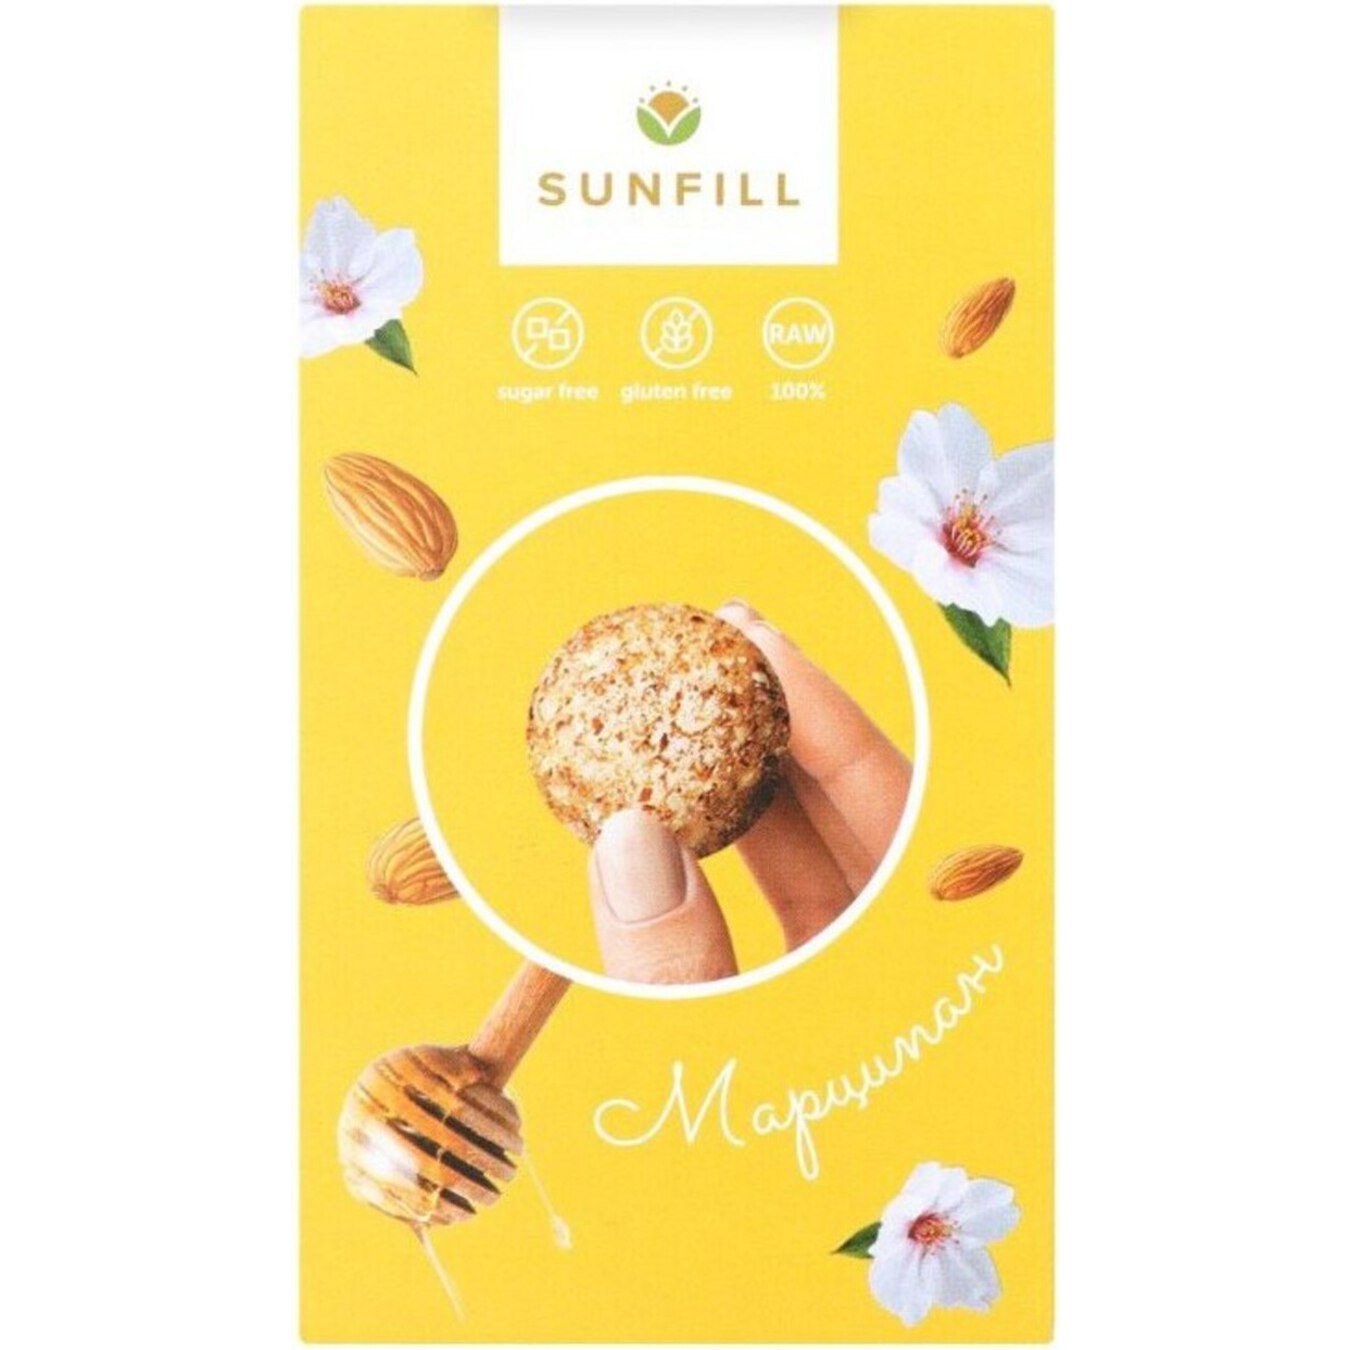 Sunfill Gluten-Free and Sugar Free Marzipan Candies 150g